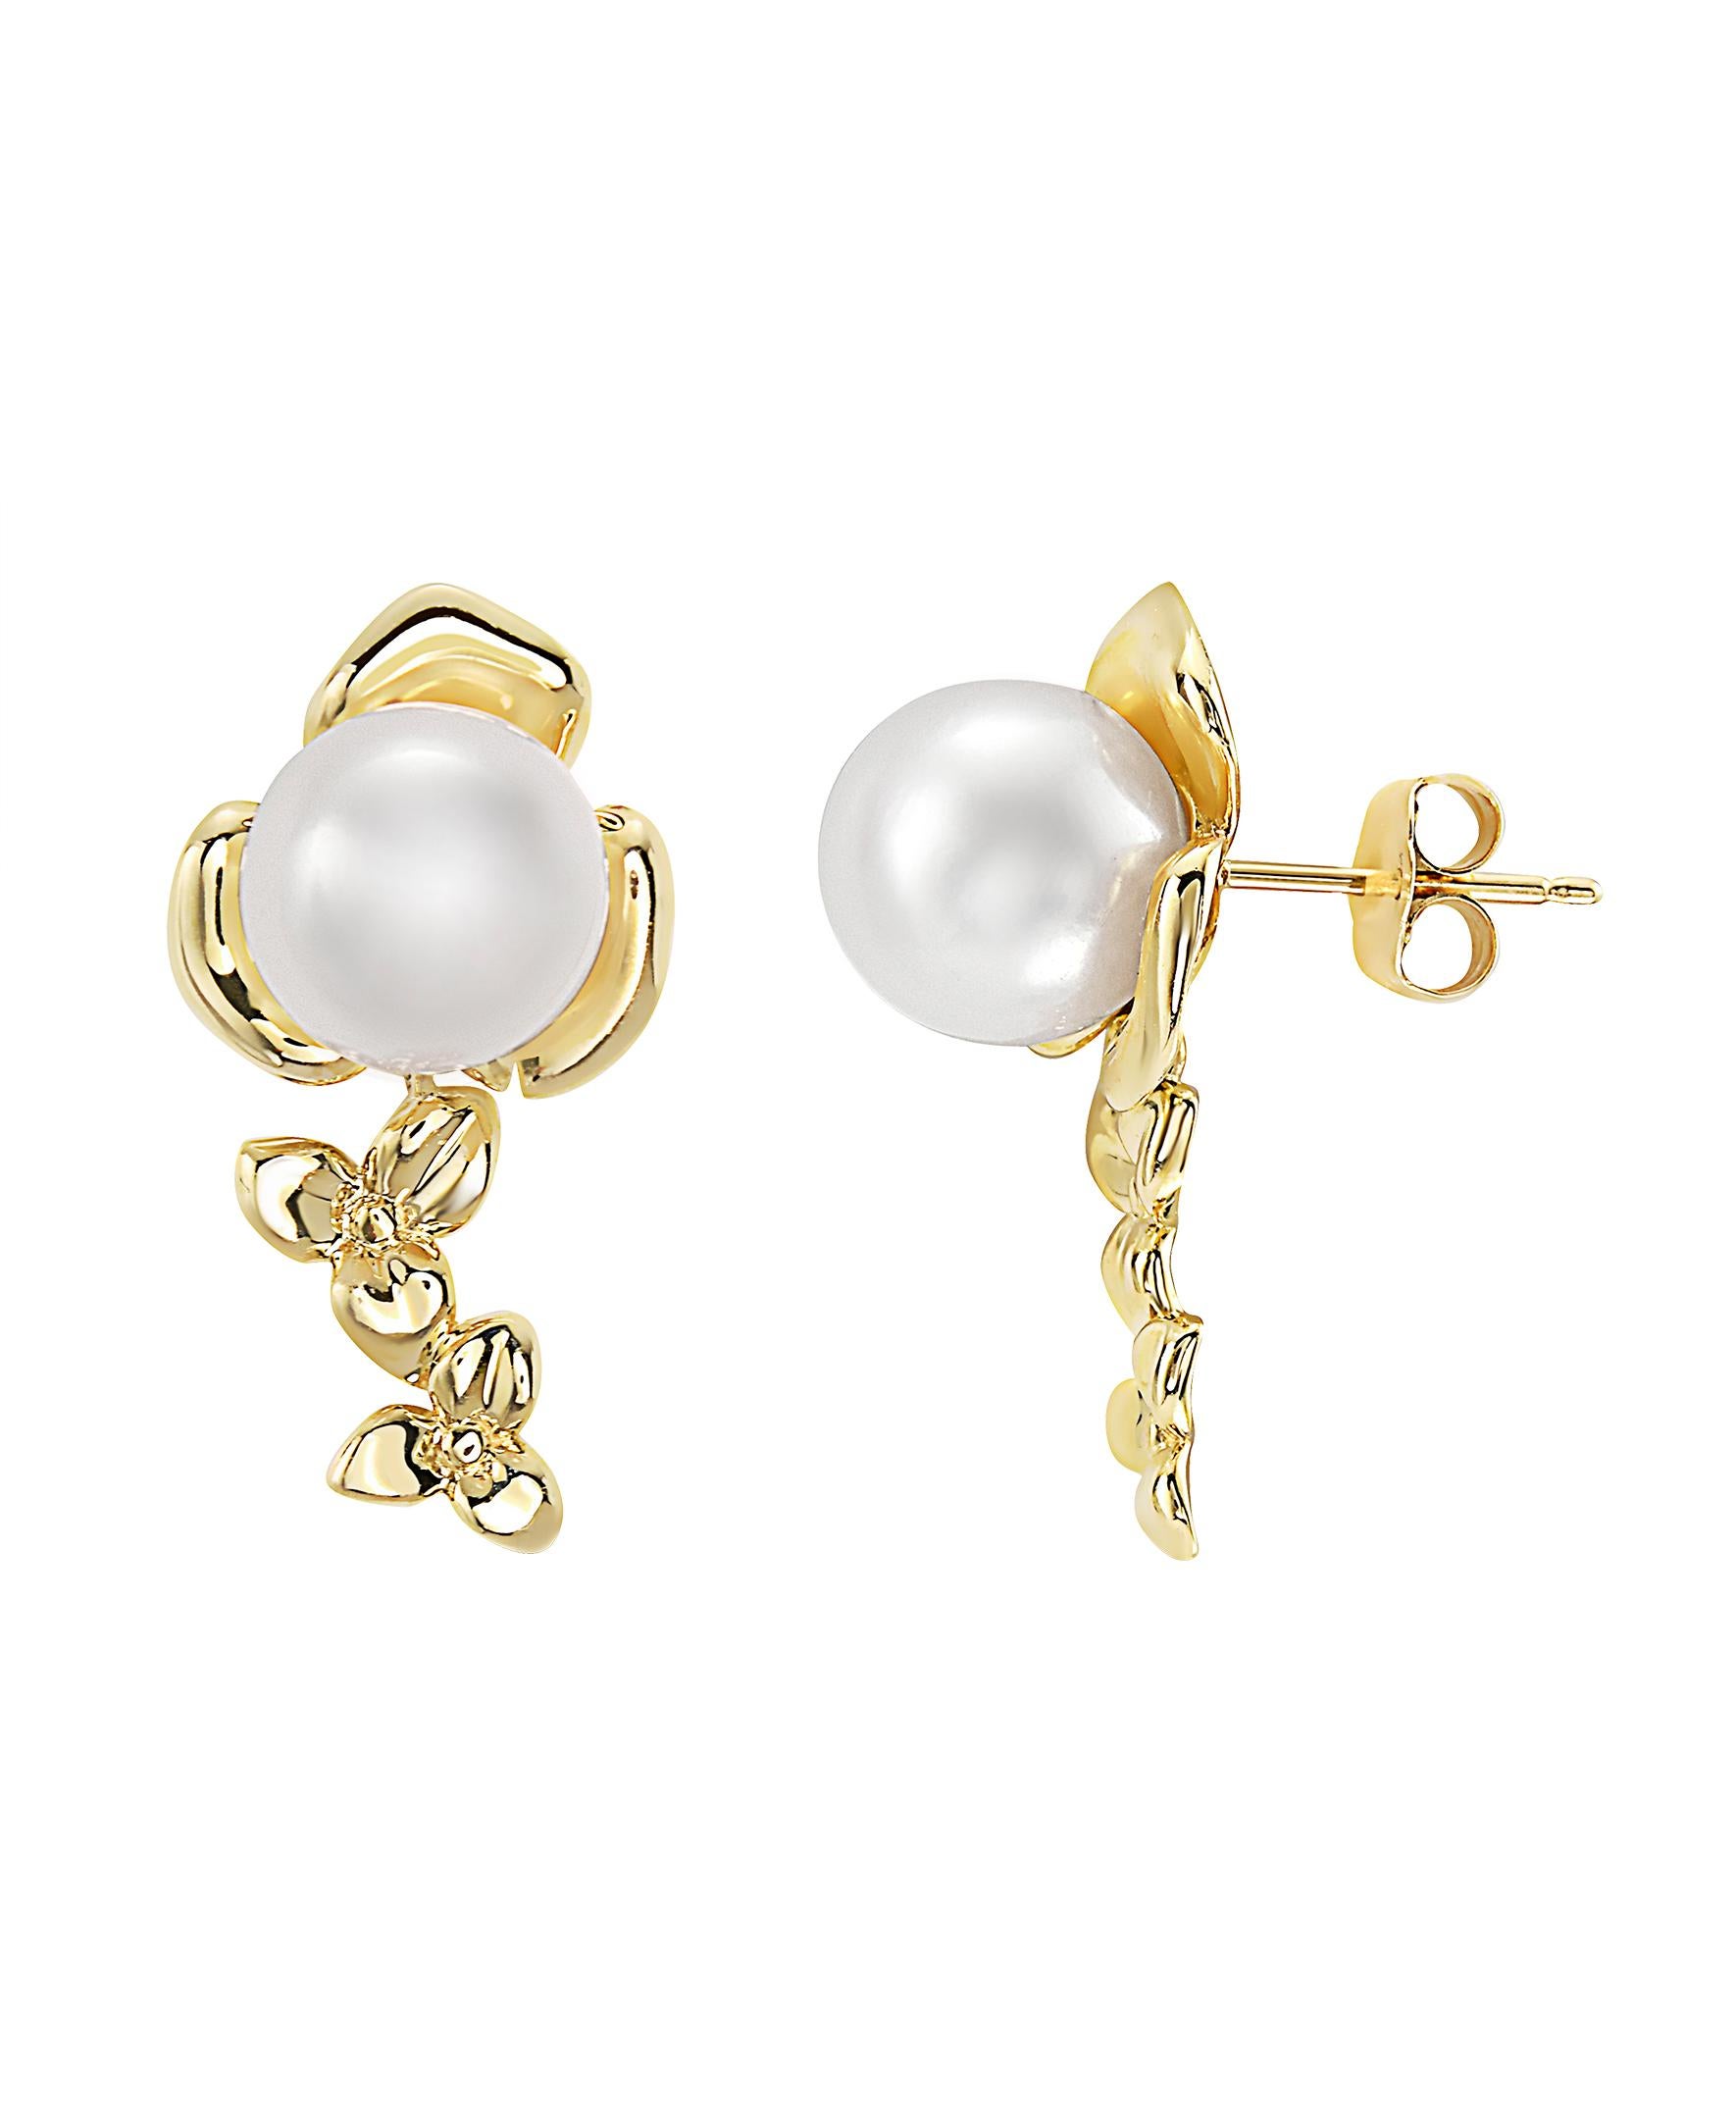 These Effy design earrings are set in 14K Yellow gold. The center of the design features a pair of 8mm fresh water pearls.
The design is accented by gold swirls, and the earrings have post back closures.

The item number is R171.